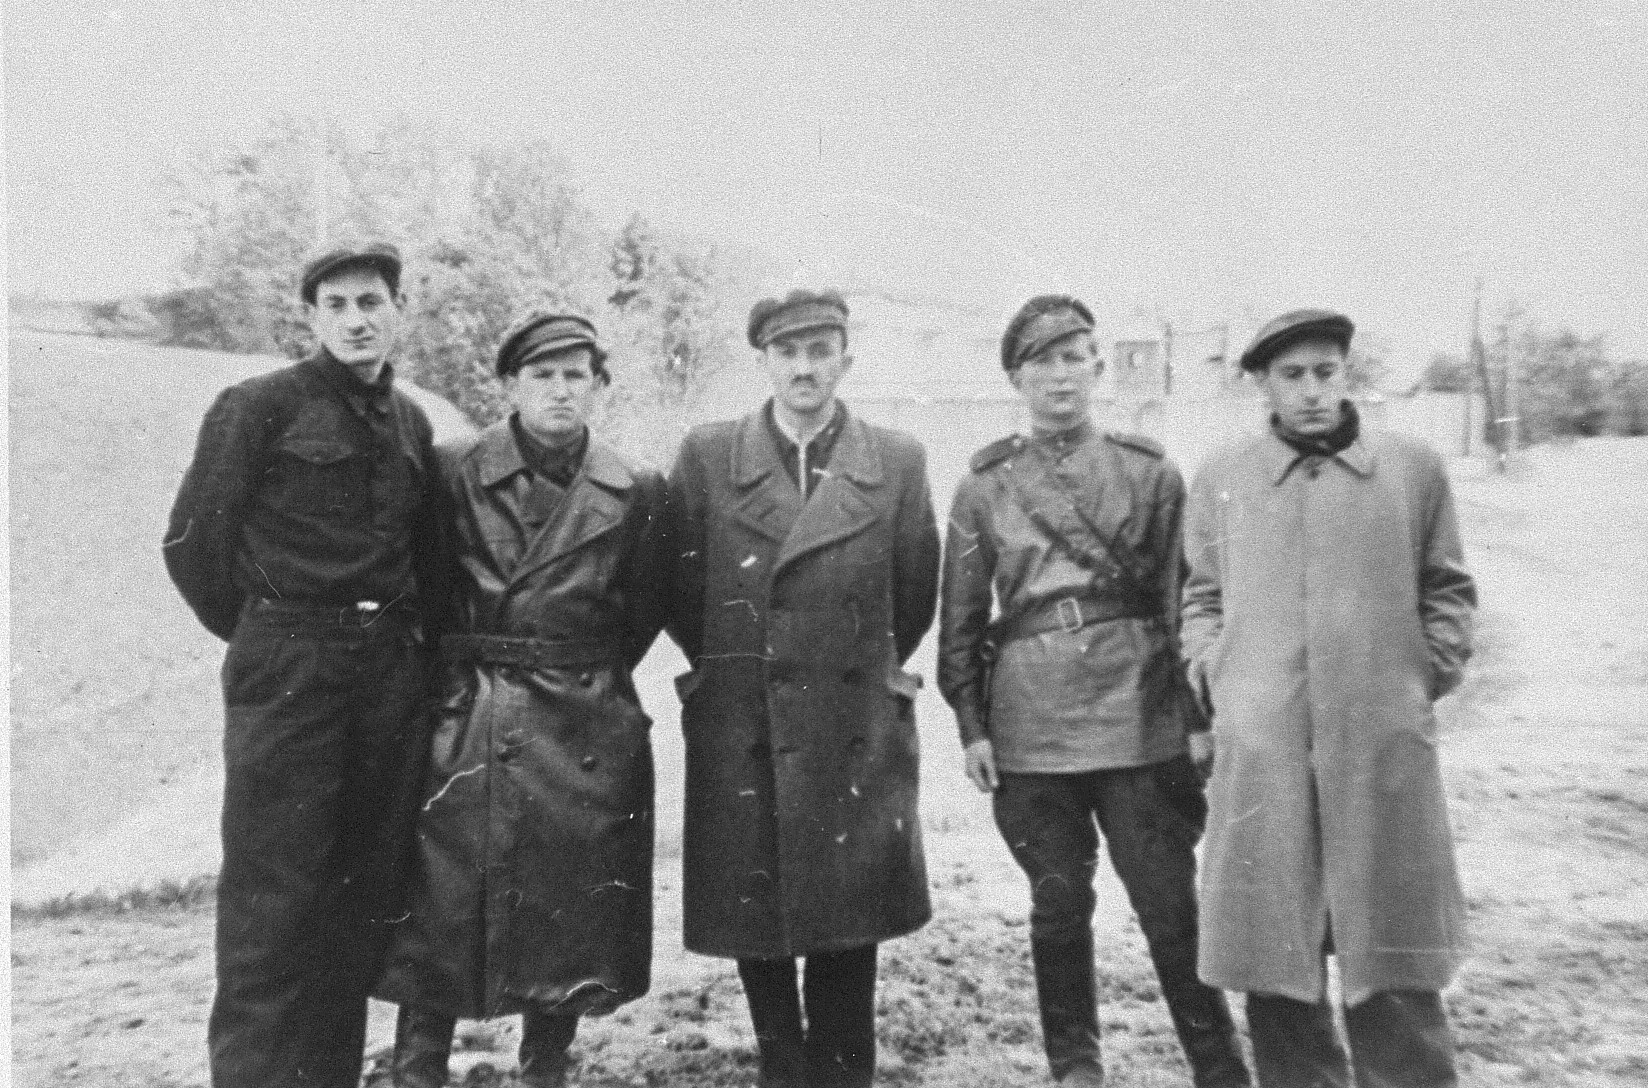 Group portrait of Jewish resistance fighters and participants in the Christmas 1943 escape from Fort IX in front of the fortress ten months after the liberation.

Pictured from left to right are: Pinia Krakinovski, Berl Gempel, Meir Yellin, Israel Gitlin and Wladyslaw Blum(?).